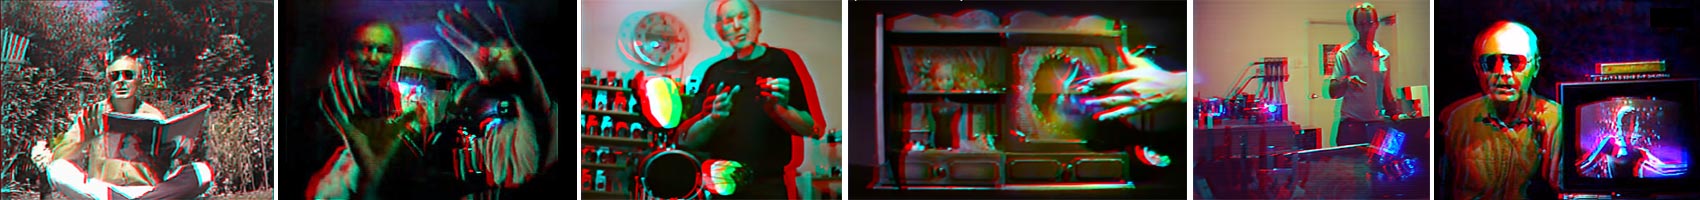 panel of anaglyph 3D frames from VIRTUAL IMAGING 1996-7 by Al Razutis